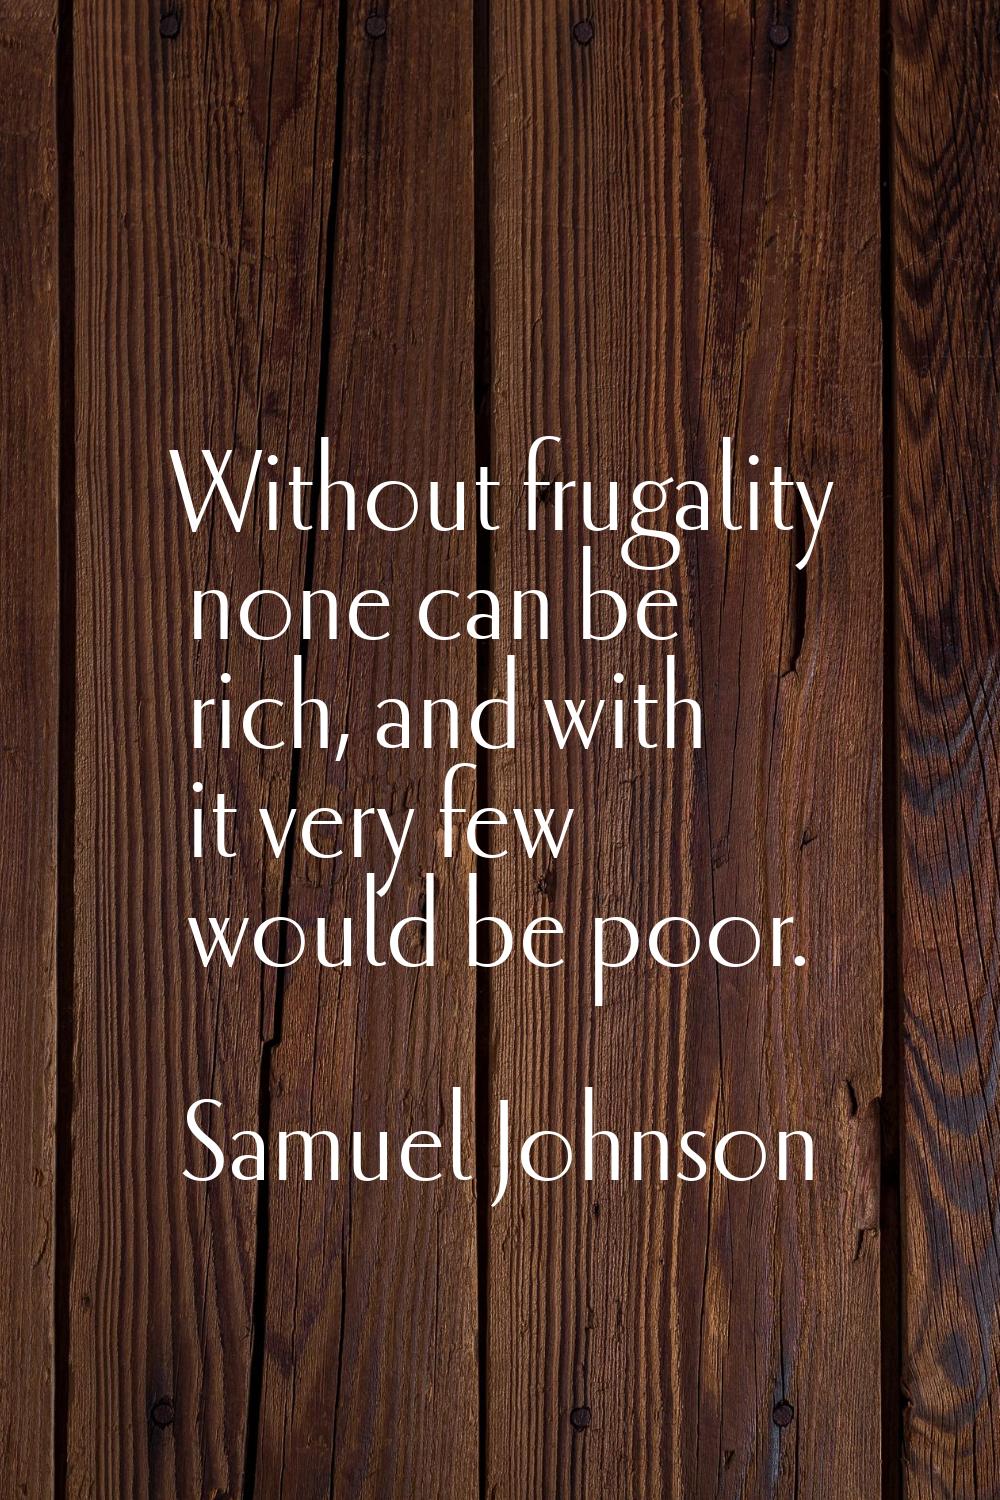 Without frugality none can be rich, and with it very few would be poor.